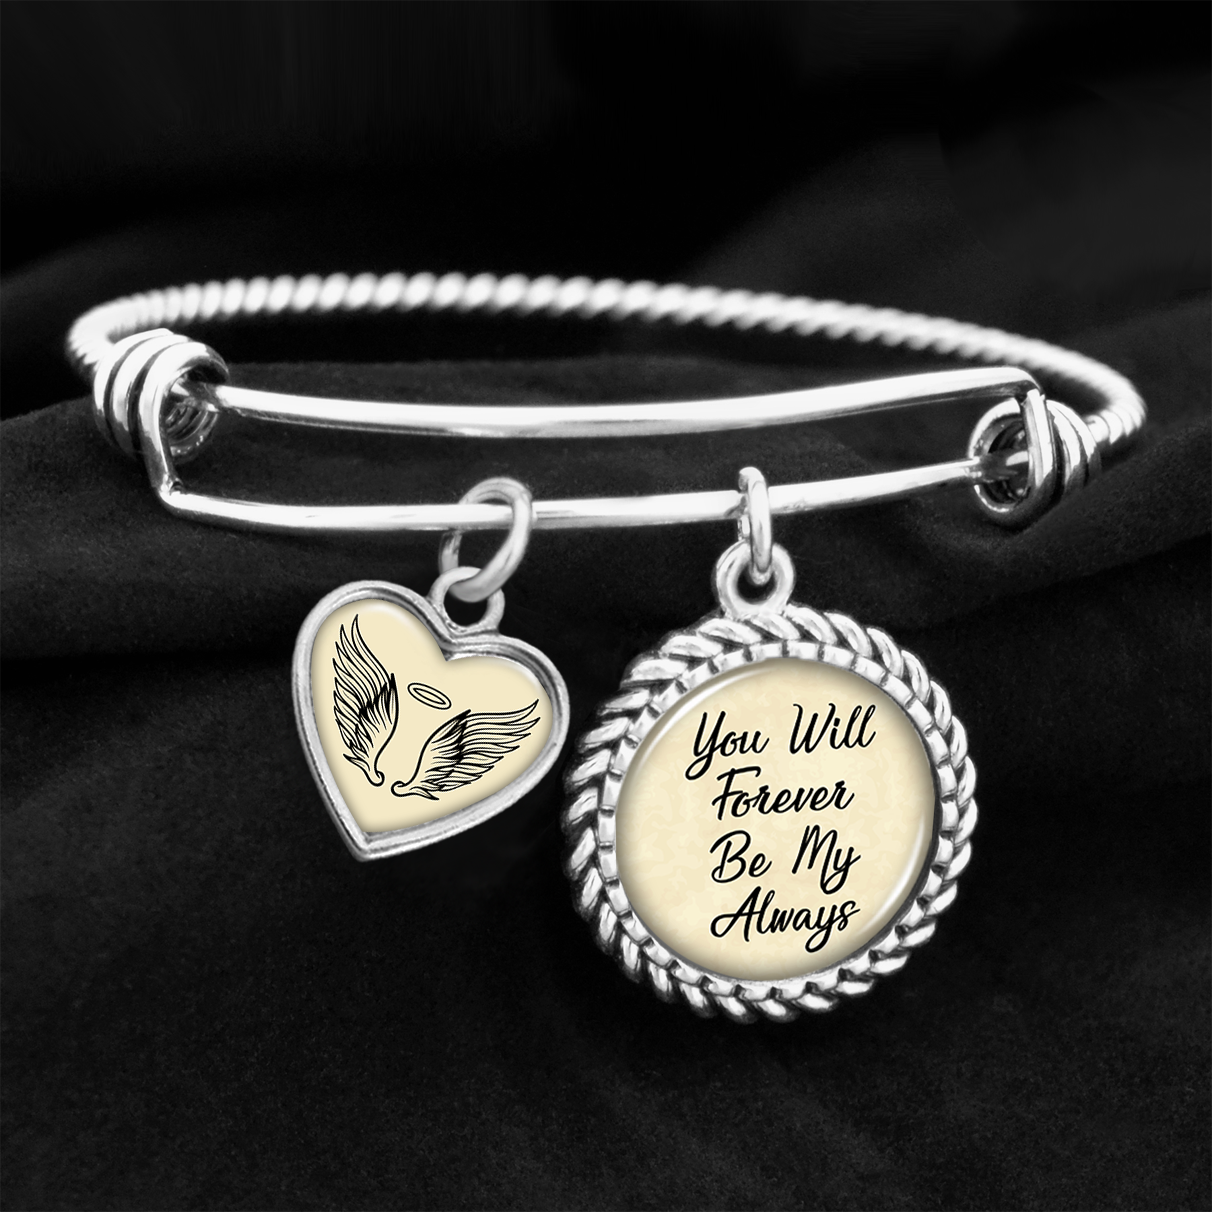 You Will Forever Be My Always Charm Bracelet